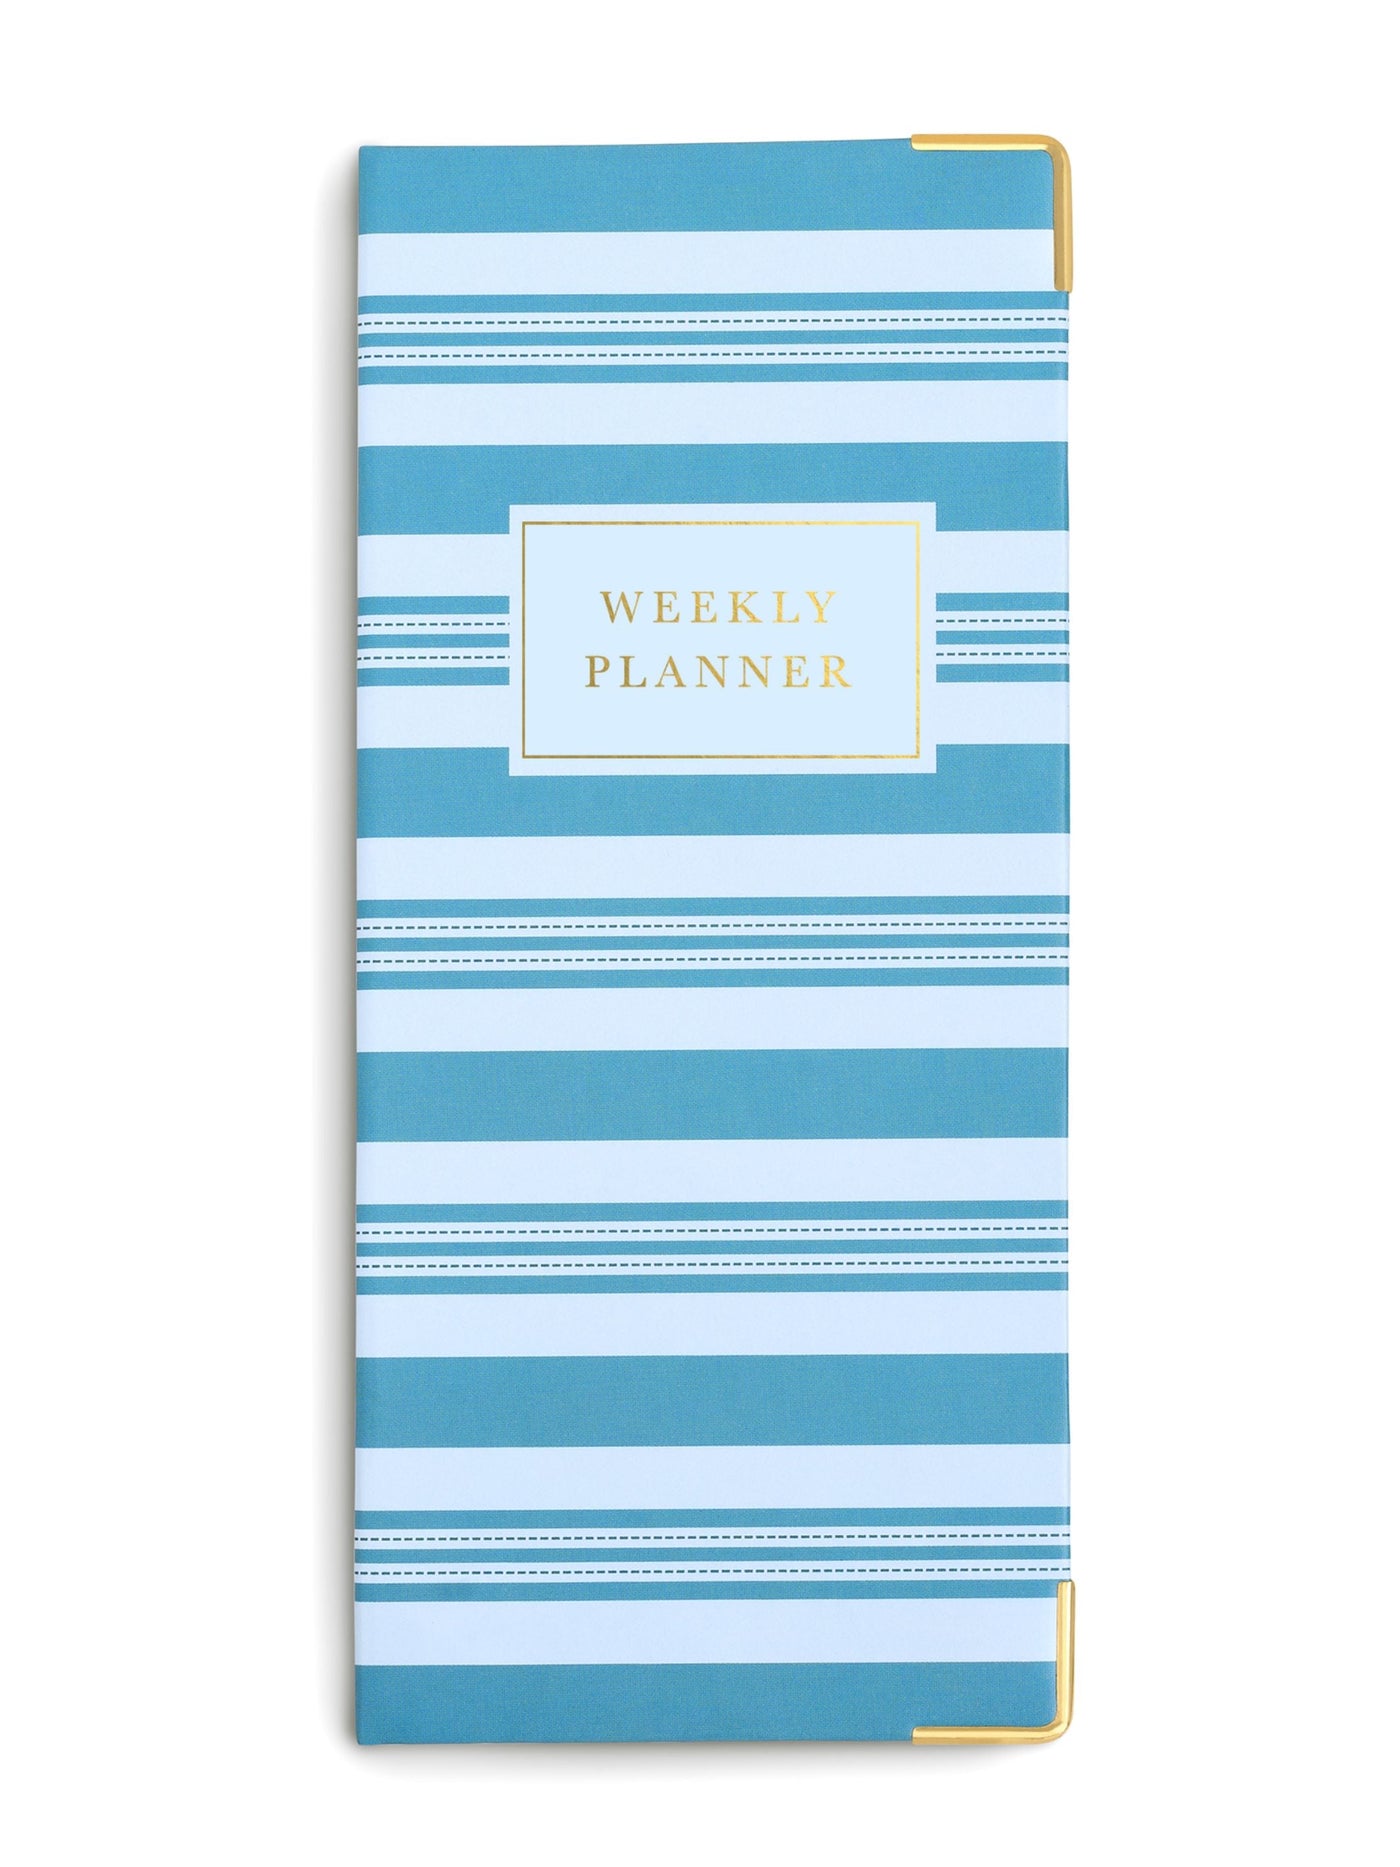 Weekly Planner Monday Blues